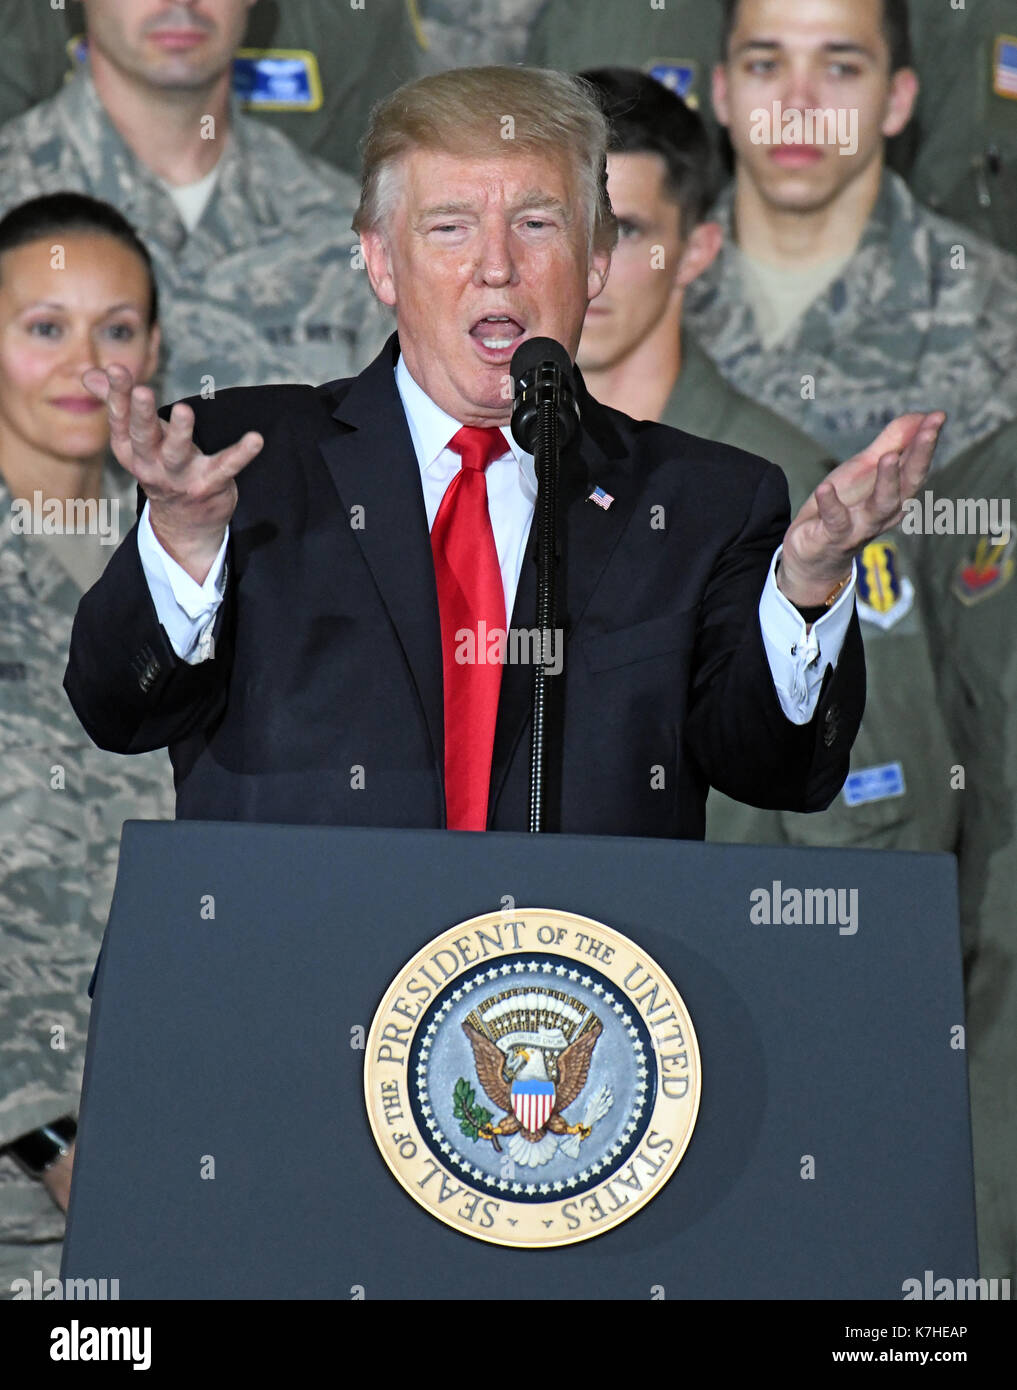 United States President Donald J. Trump delivers remarks to military personnel and families in a hanger at Joint Base Andrews in Maryland on Friday, September 15, 2017. He visited JBA to commemorate the 70th anniversary of the US Air Force. Credit: Ron Sachs/CNP Stock Photo